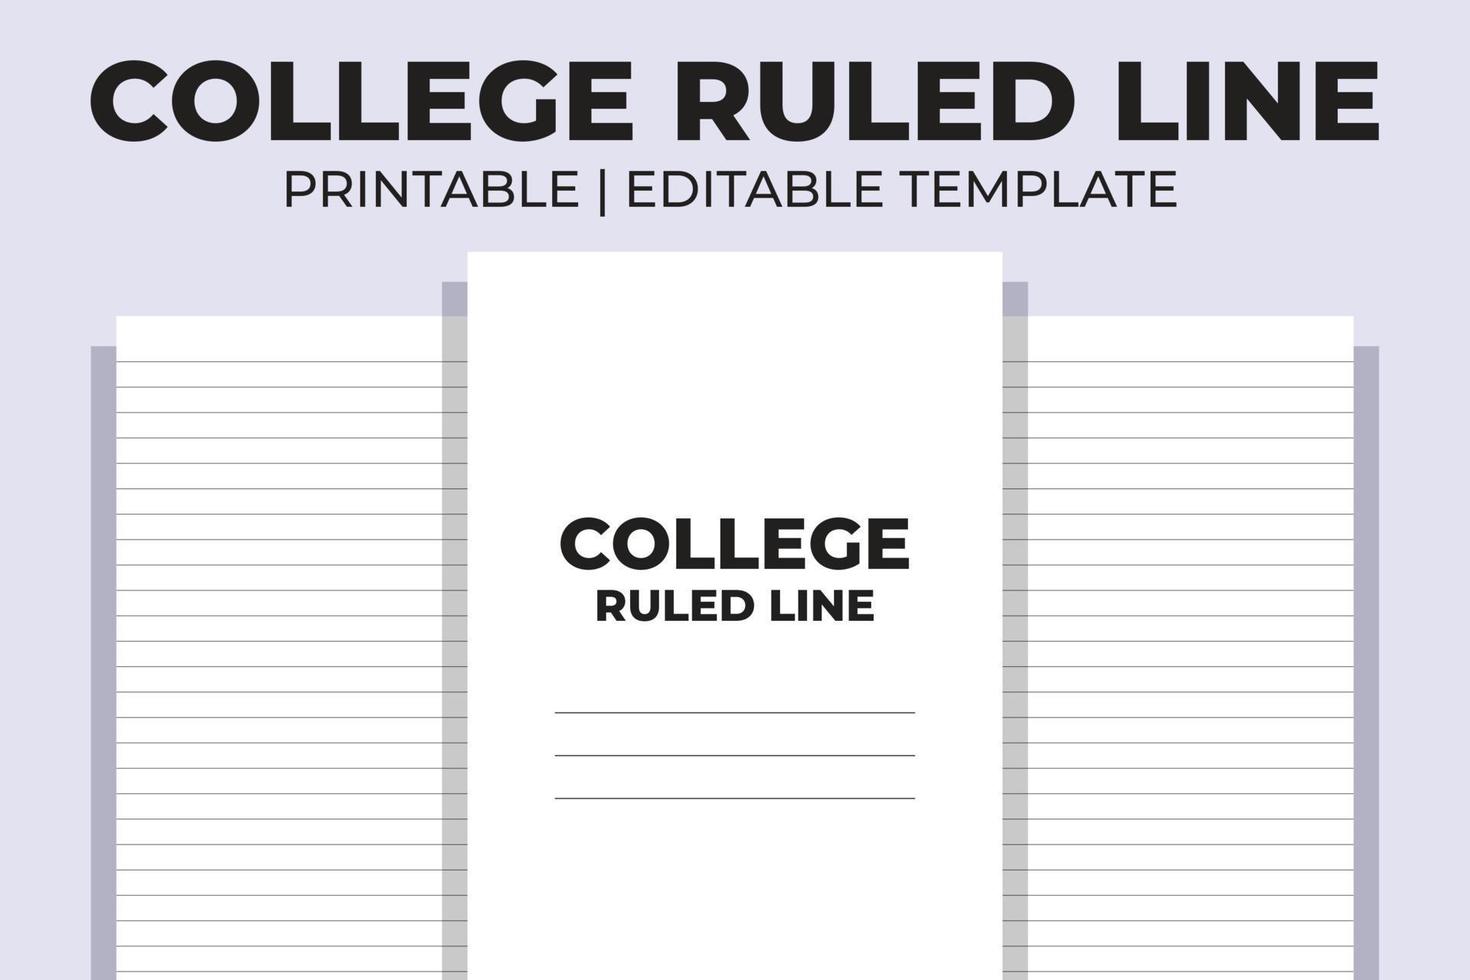 College Ruled Line vector